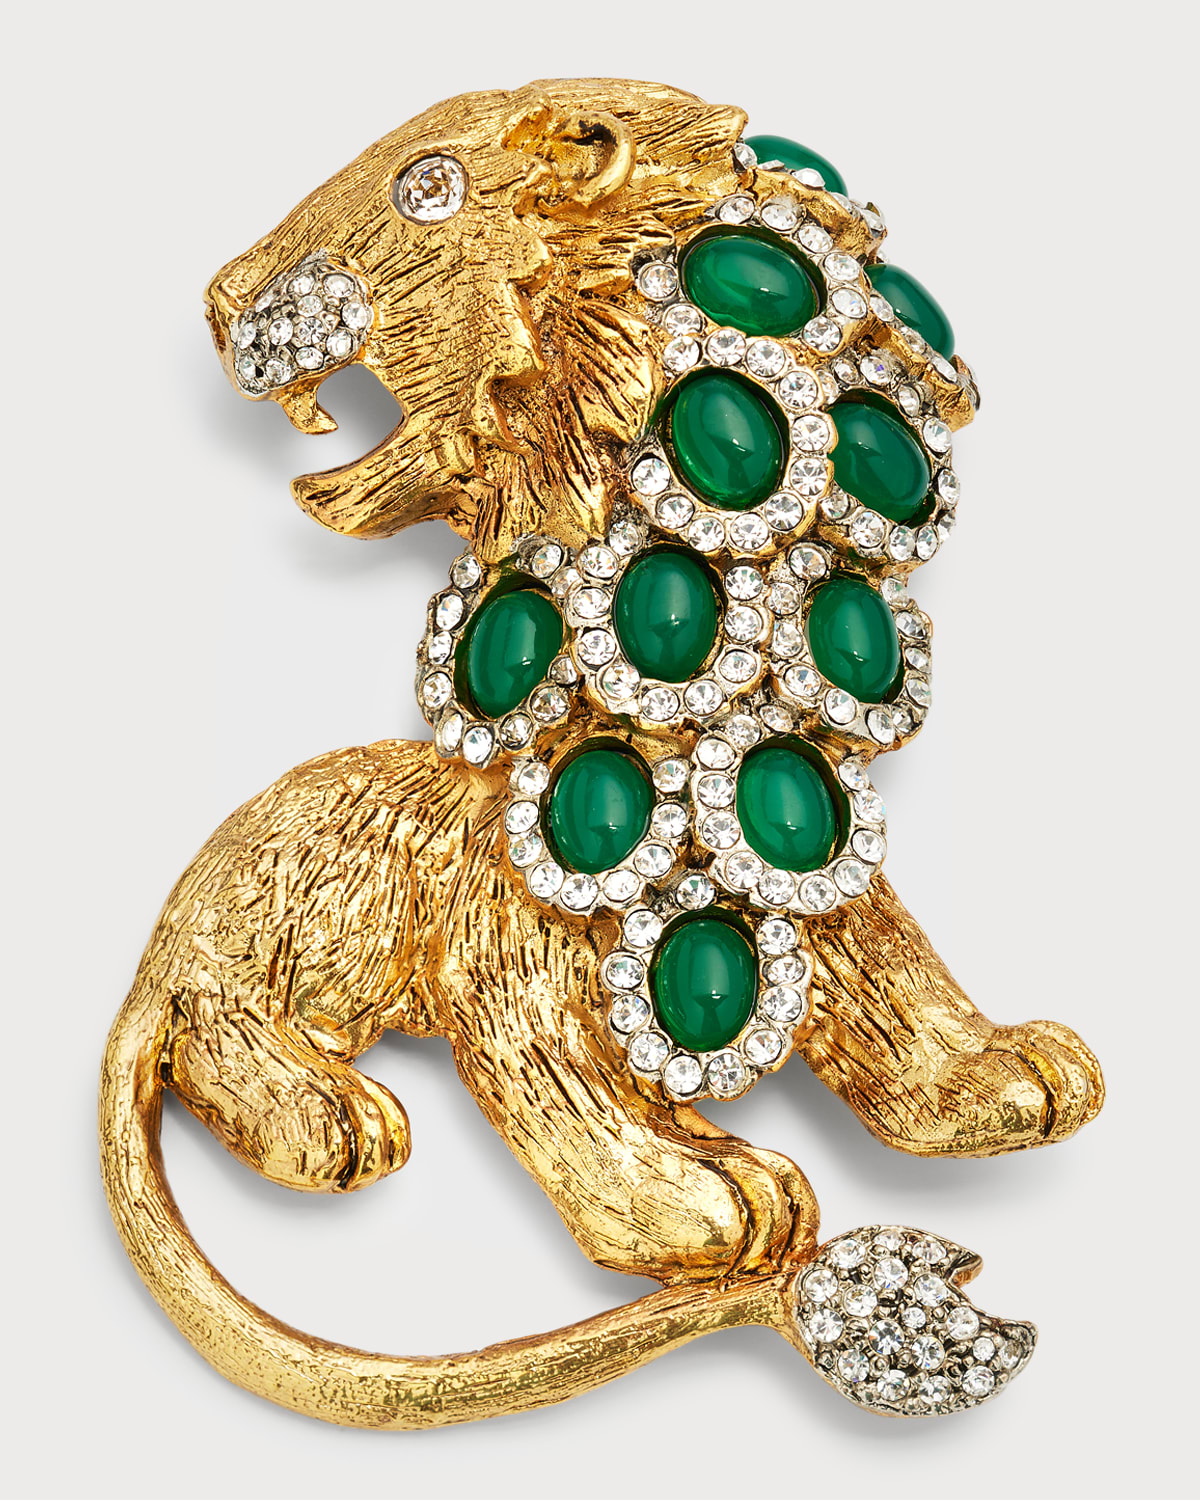 Gold and Emerald Lion Pin